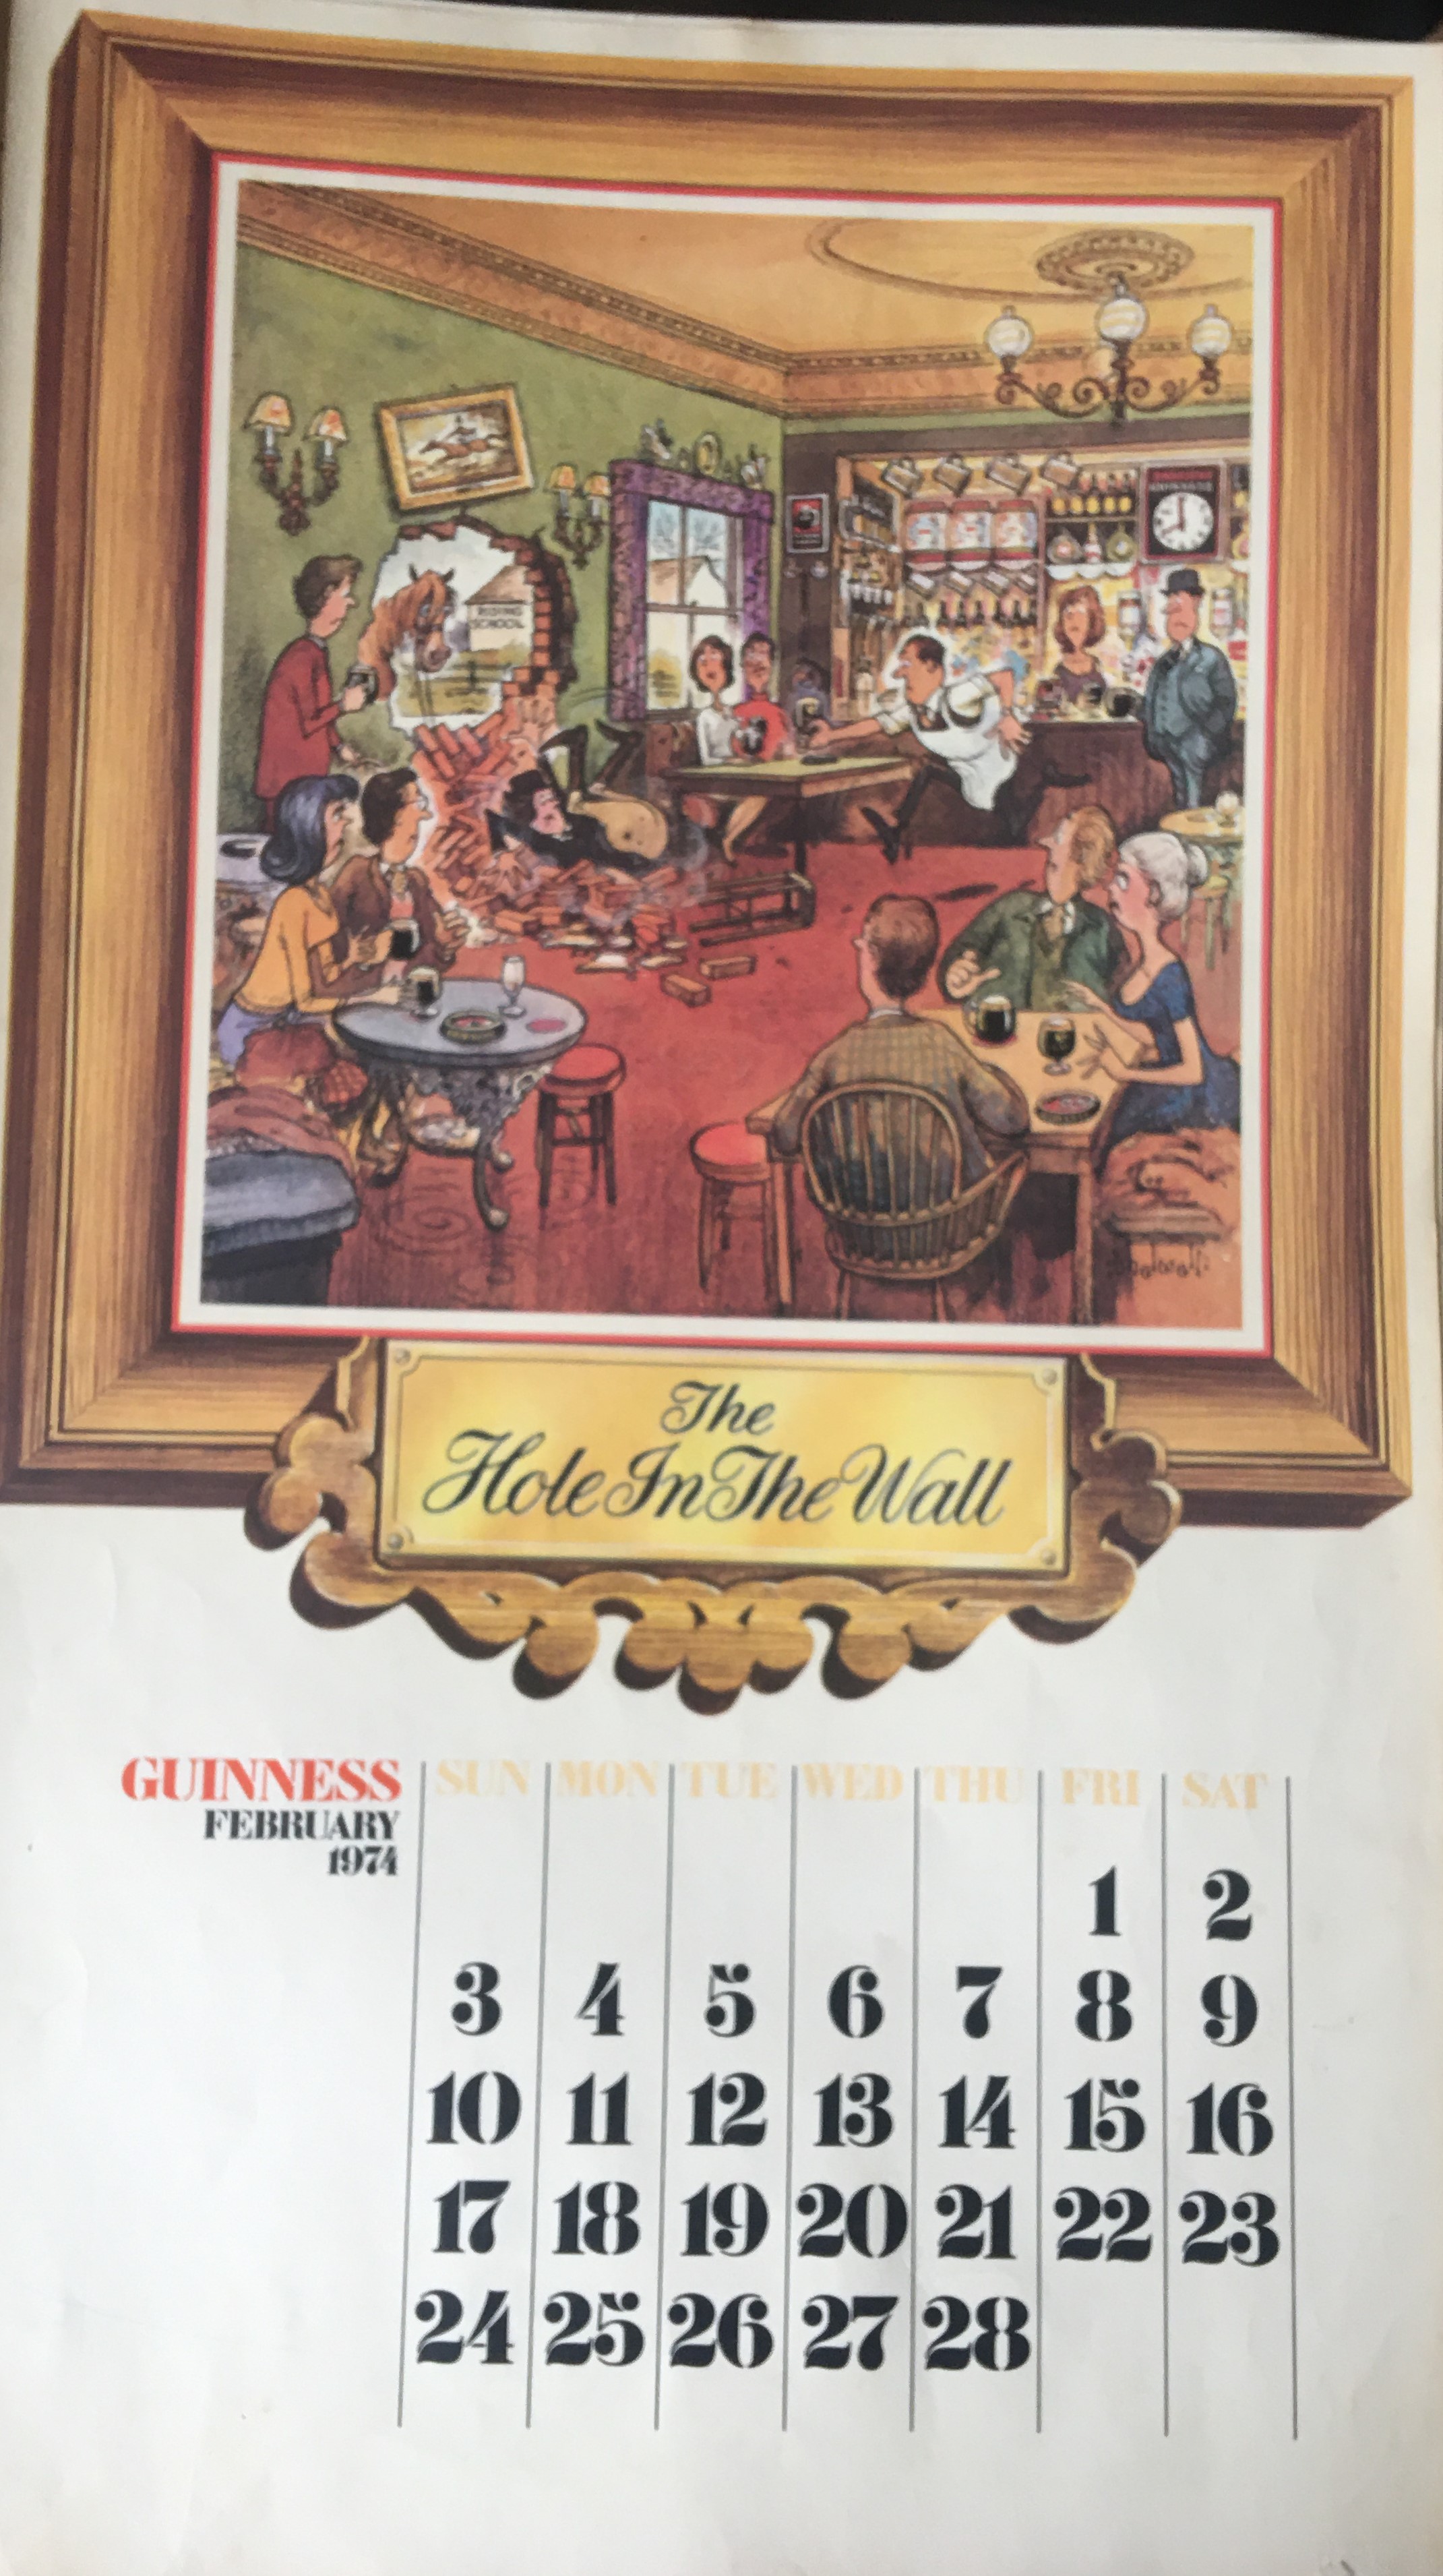 GUINNESS 1974 Calendar Prints 'Pub Names' Artwork by Norman Thelwell *2